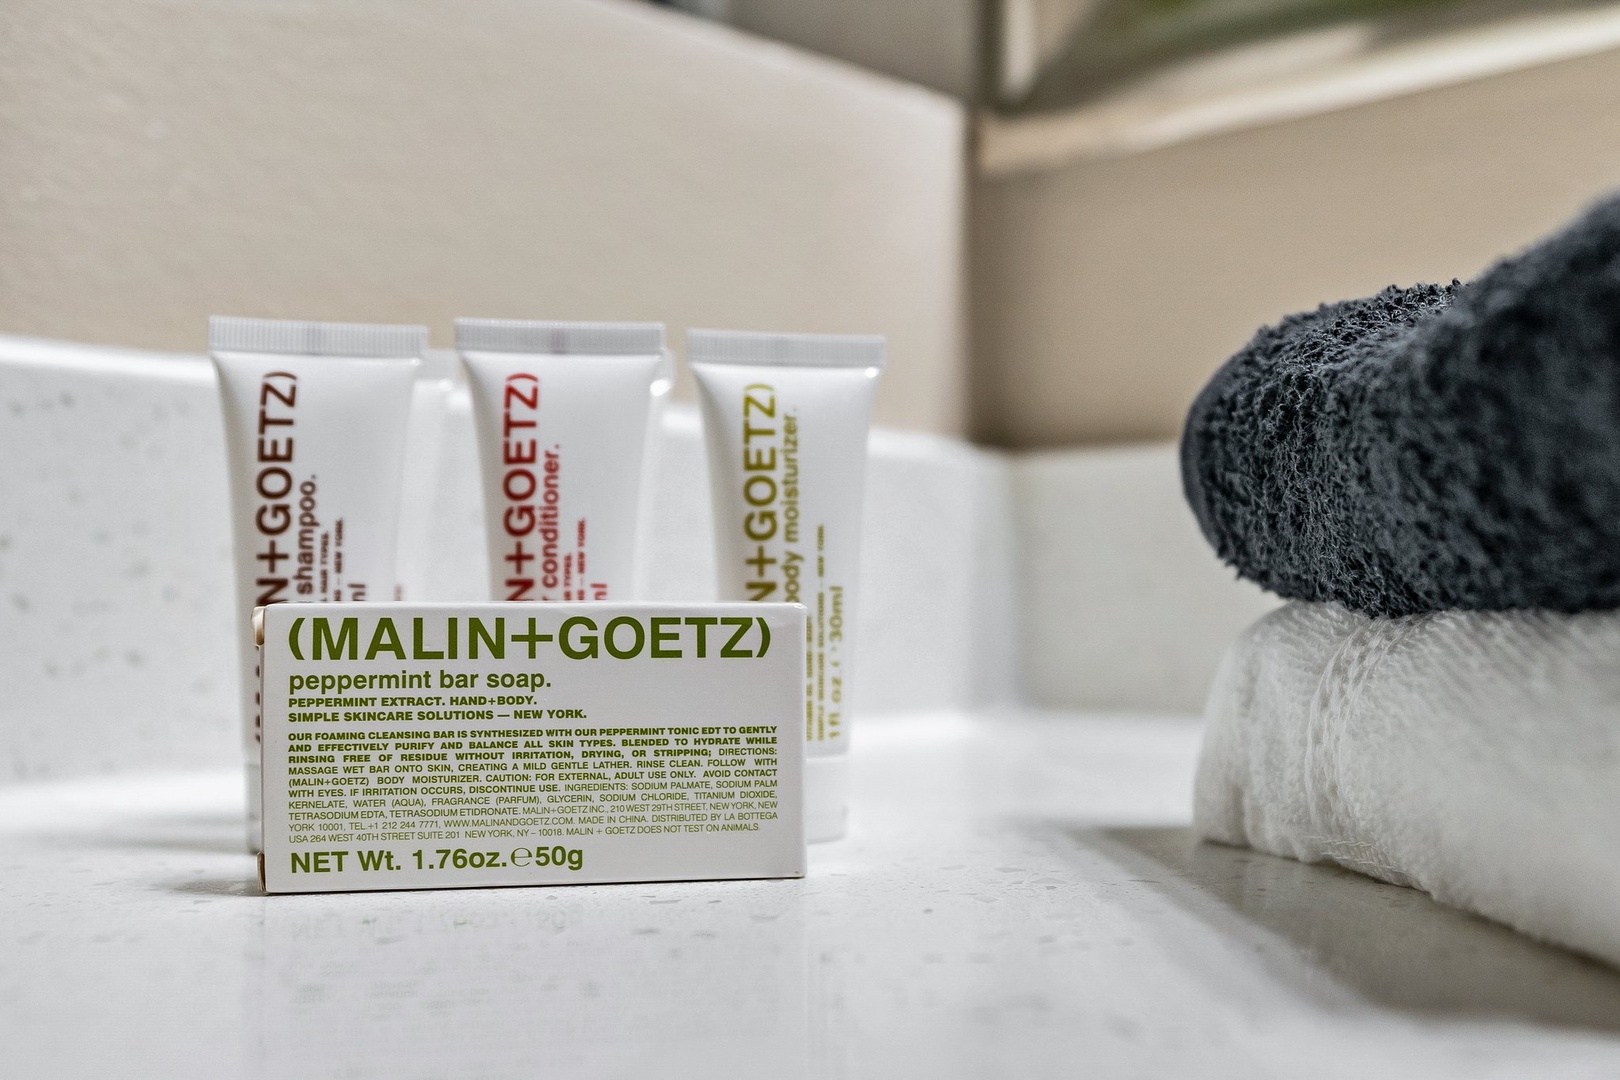 Treat yourself to complimentary toiletries by Malin + Goetz in the bathroom.